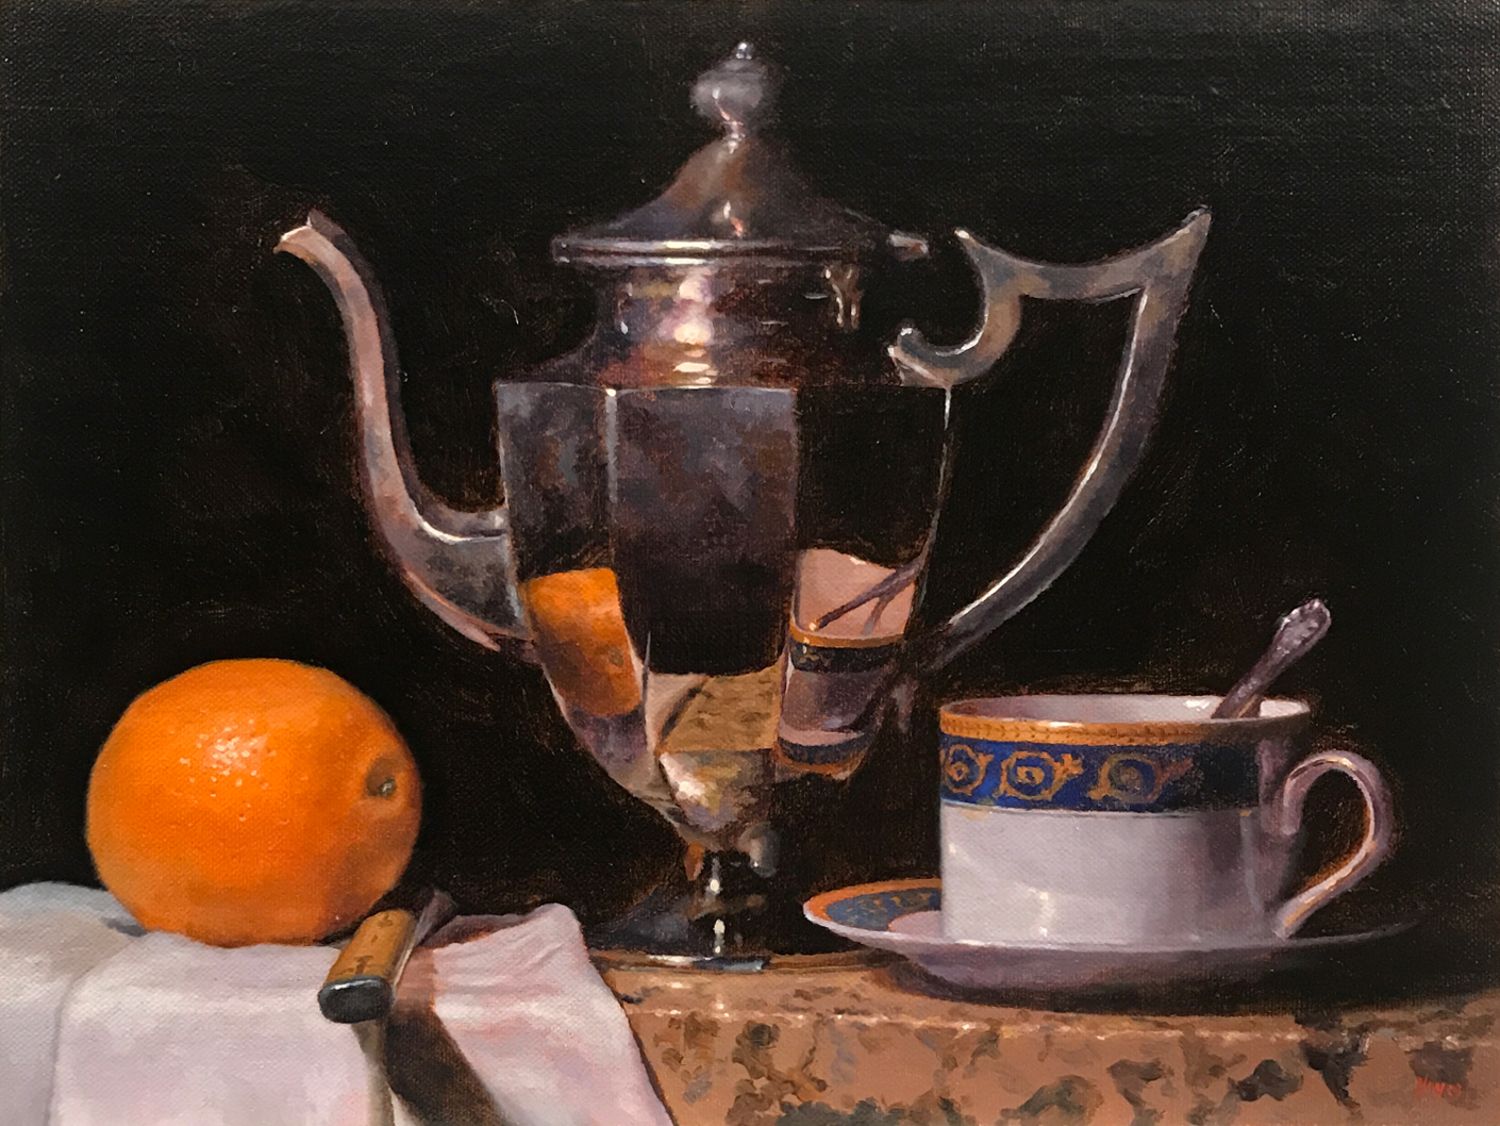 "Orange, Knife, Teapot, Teacup" Oil on linen, 9x12 inches, 2019 (sold)